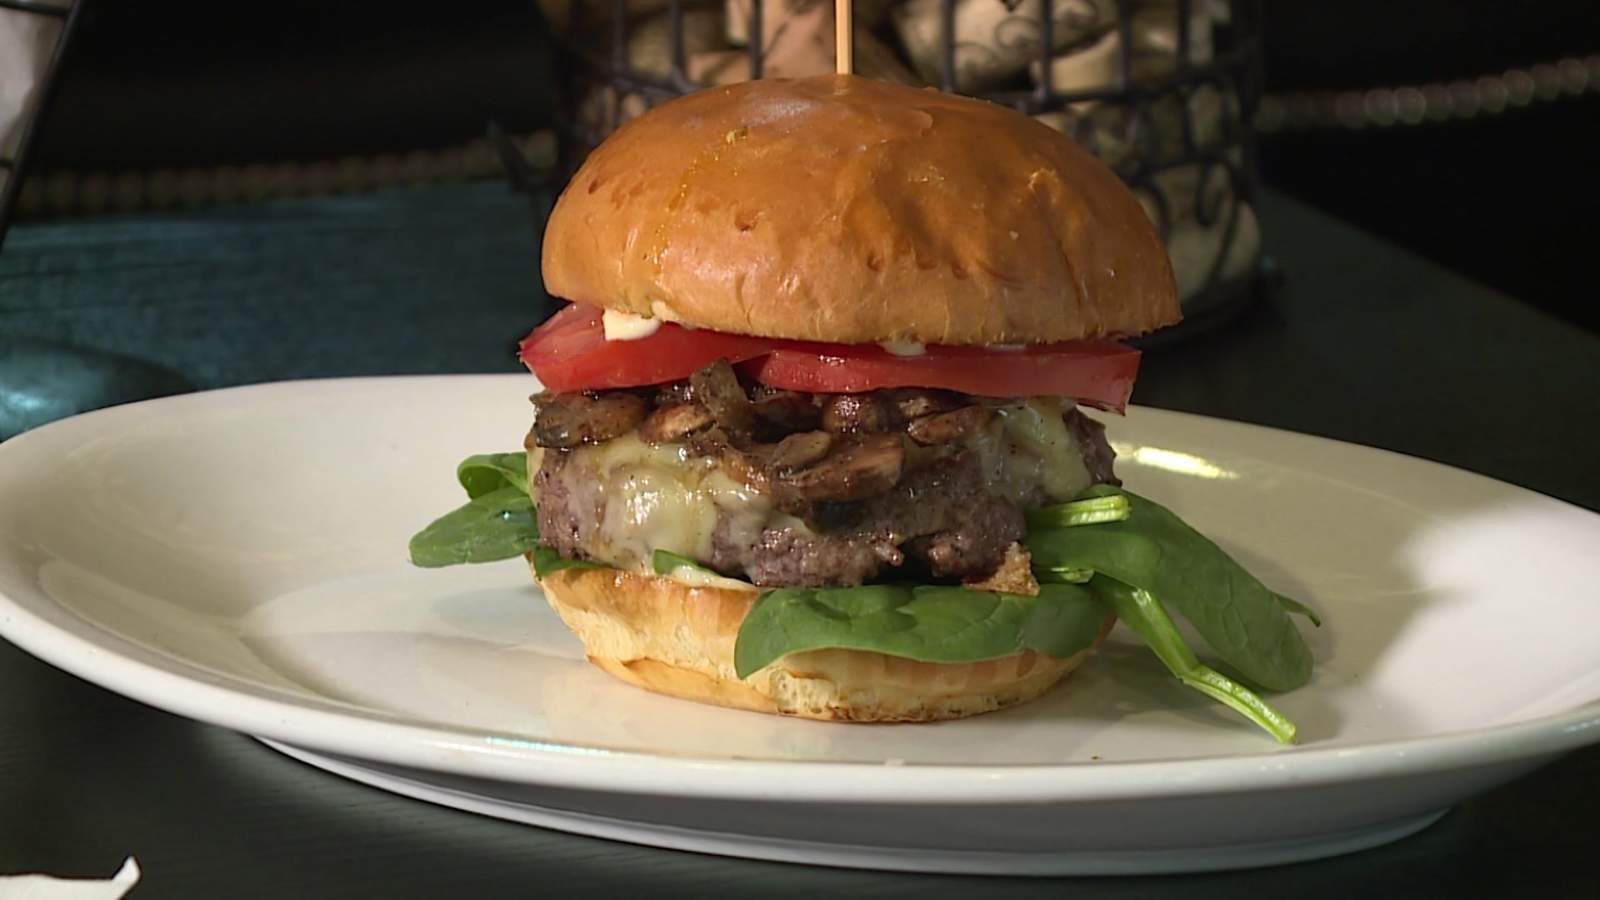 Takeout Shoutout: Burger Palace uses high-quality ingredients to make scrumptious burgers